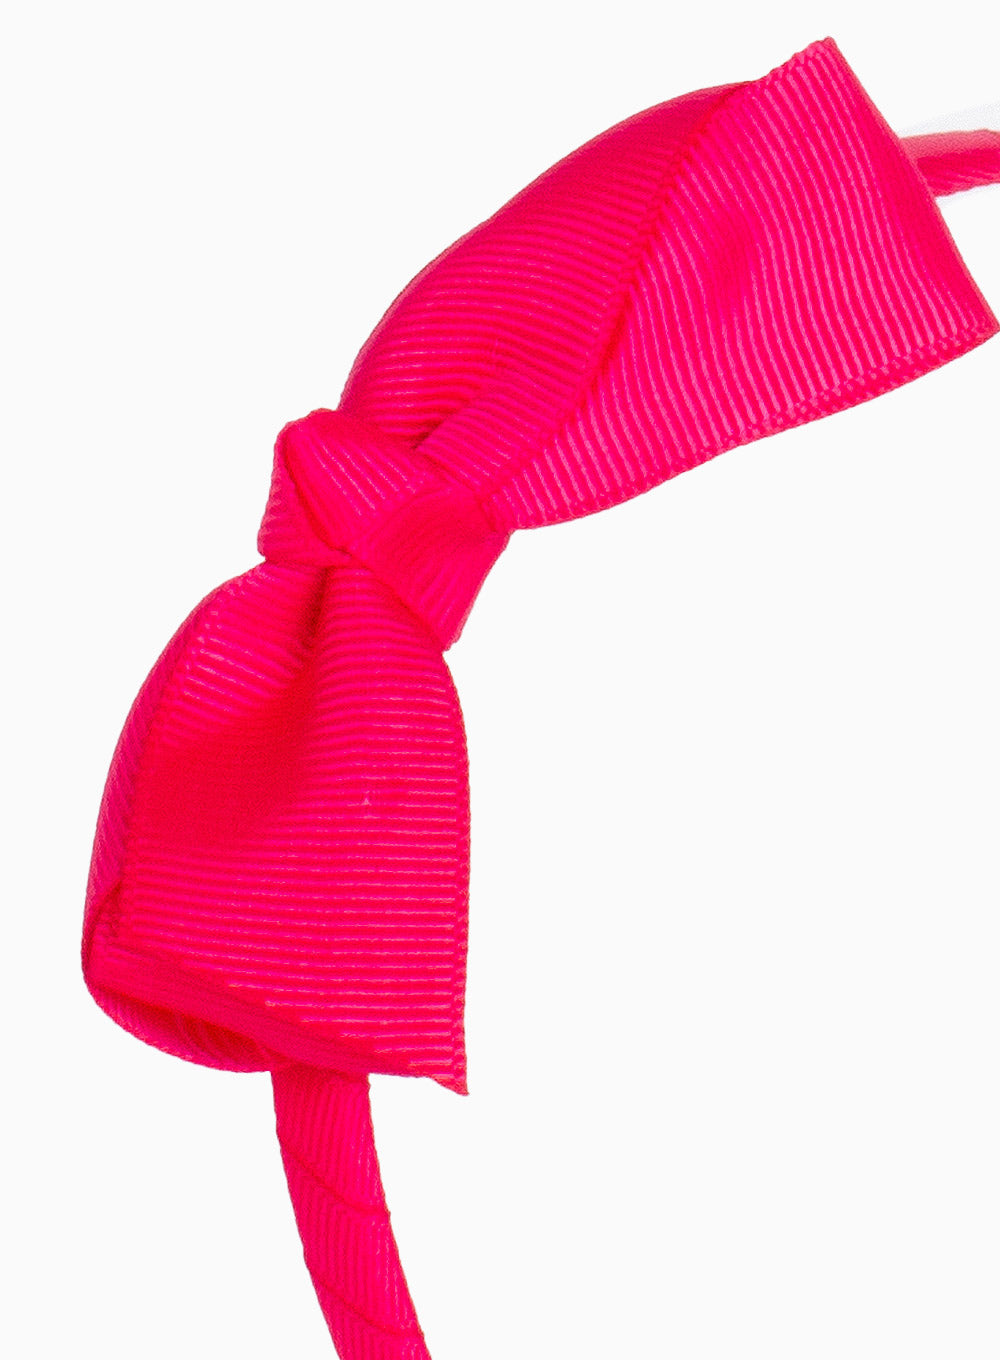 Pretty Bow Alice Band in Shocking Pink